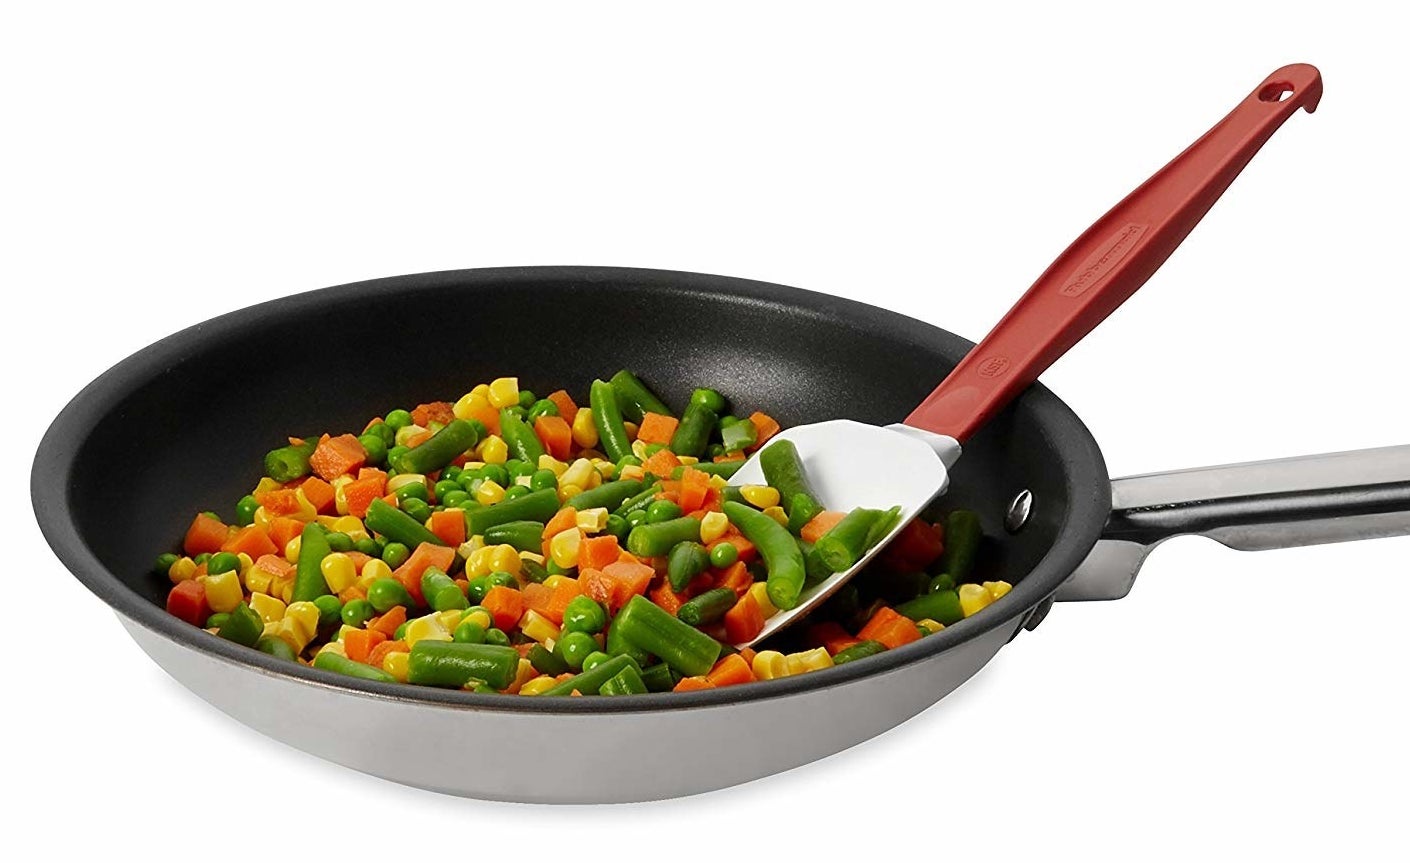 the silicone spoon spatula scooping mixed vegetables out of a pan